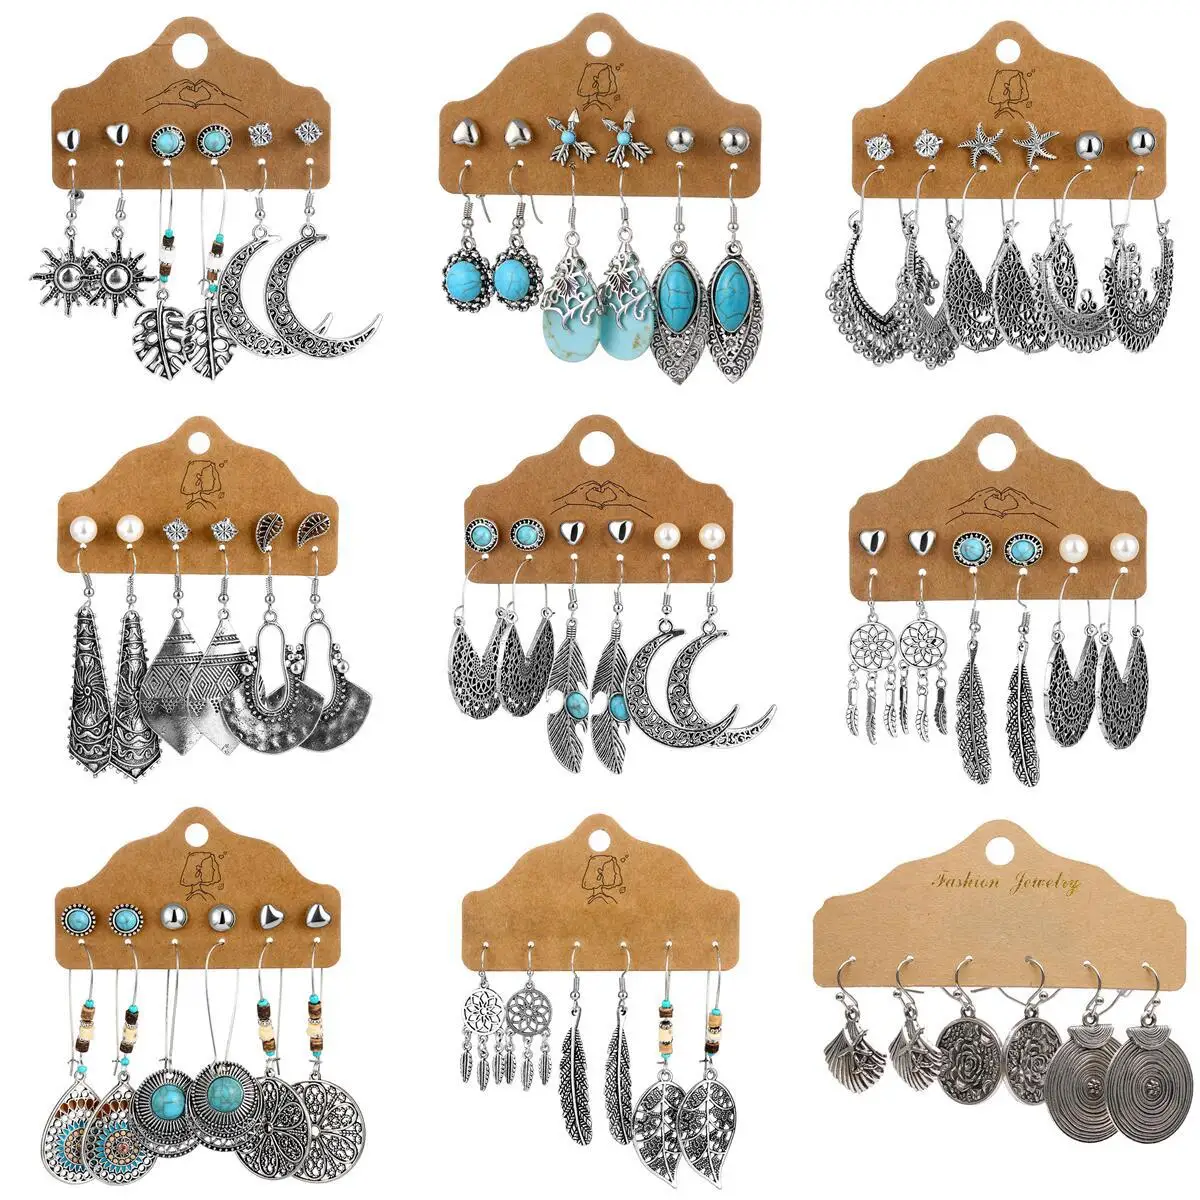 

Aug jewelry Mixed wholesale mixed batch optional semicircle 6 pairs of earrings set boho style bulk retro hollow carved earrings, Picture shows